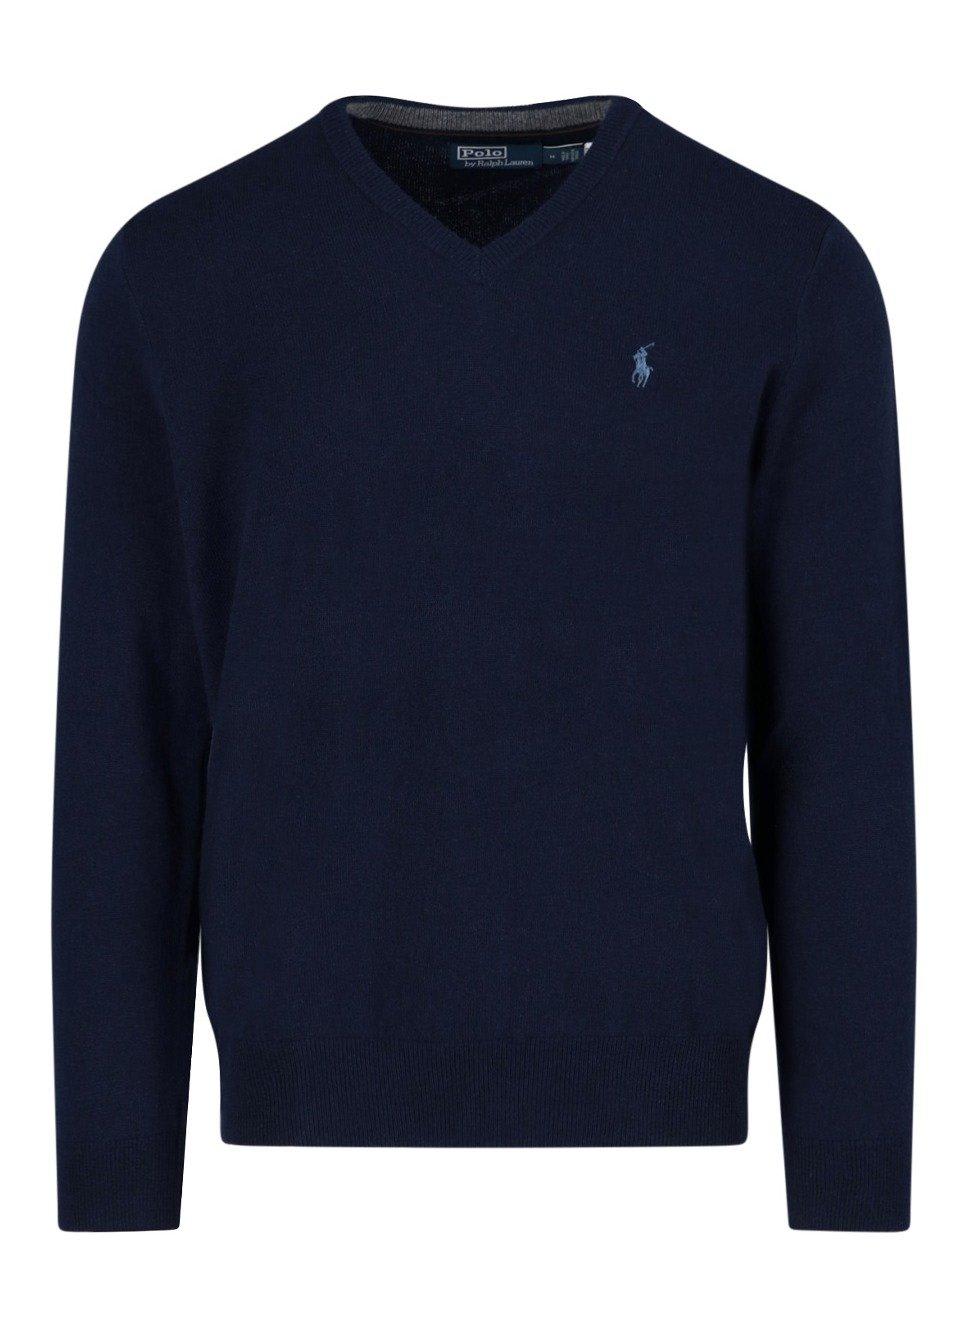 POLO RALPH LAUREN PONY EMBROIDERED KNIT JUMPER